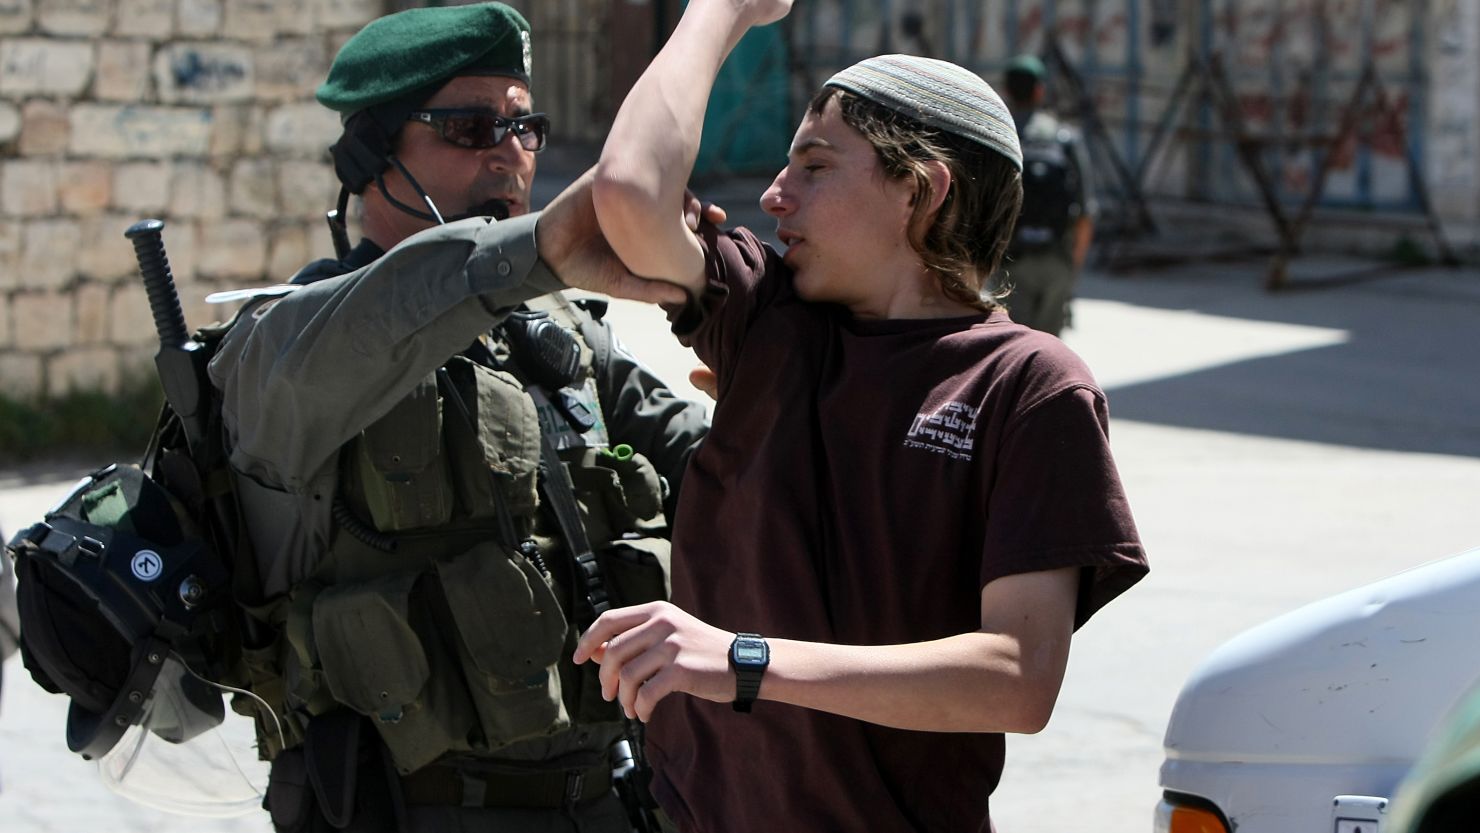 A Jewish settler argues with an officer as Israeli forces evict settlers from a house in Hebron, West Bank, on Wednesday.